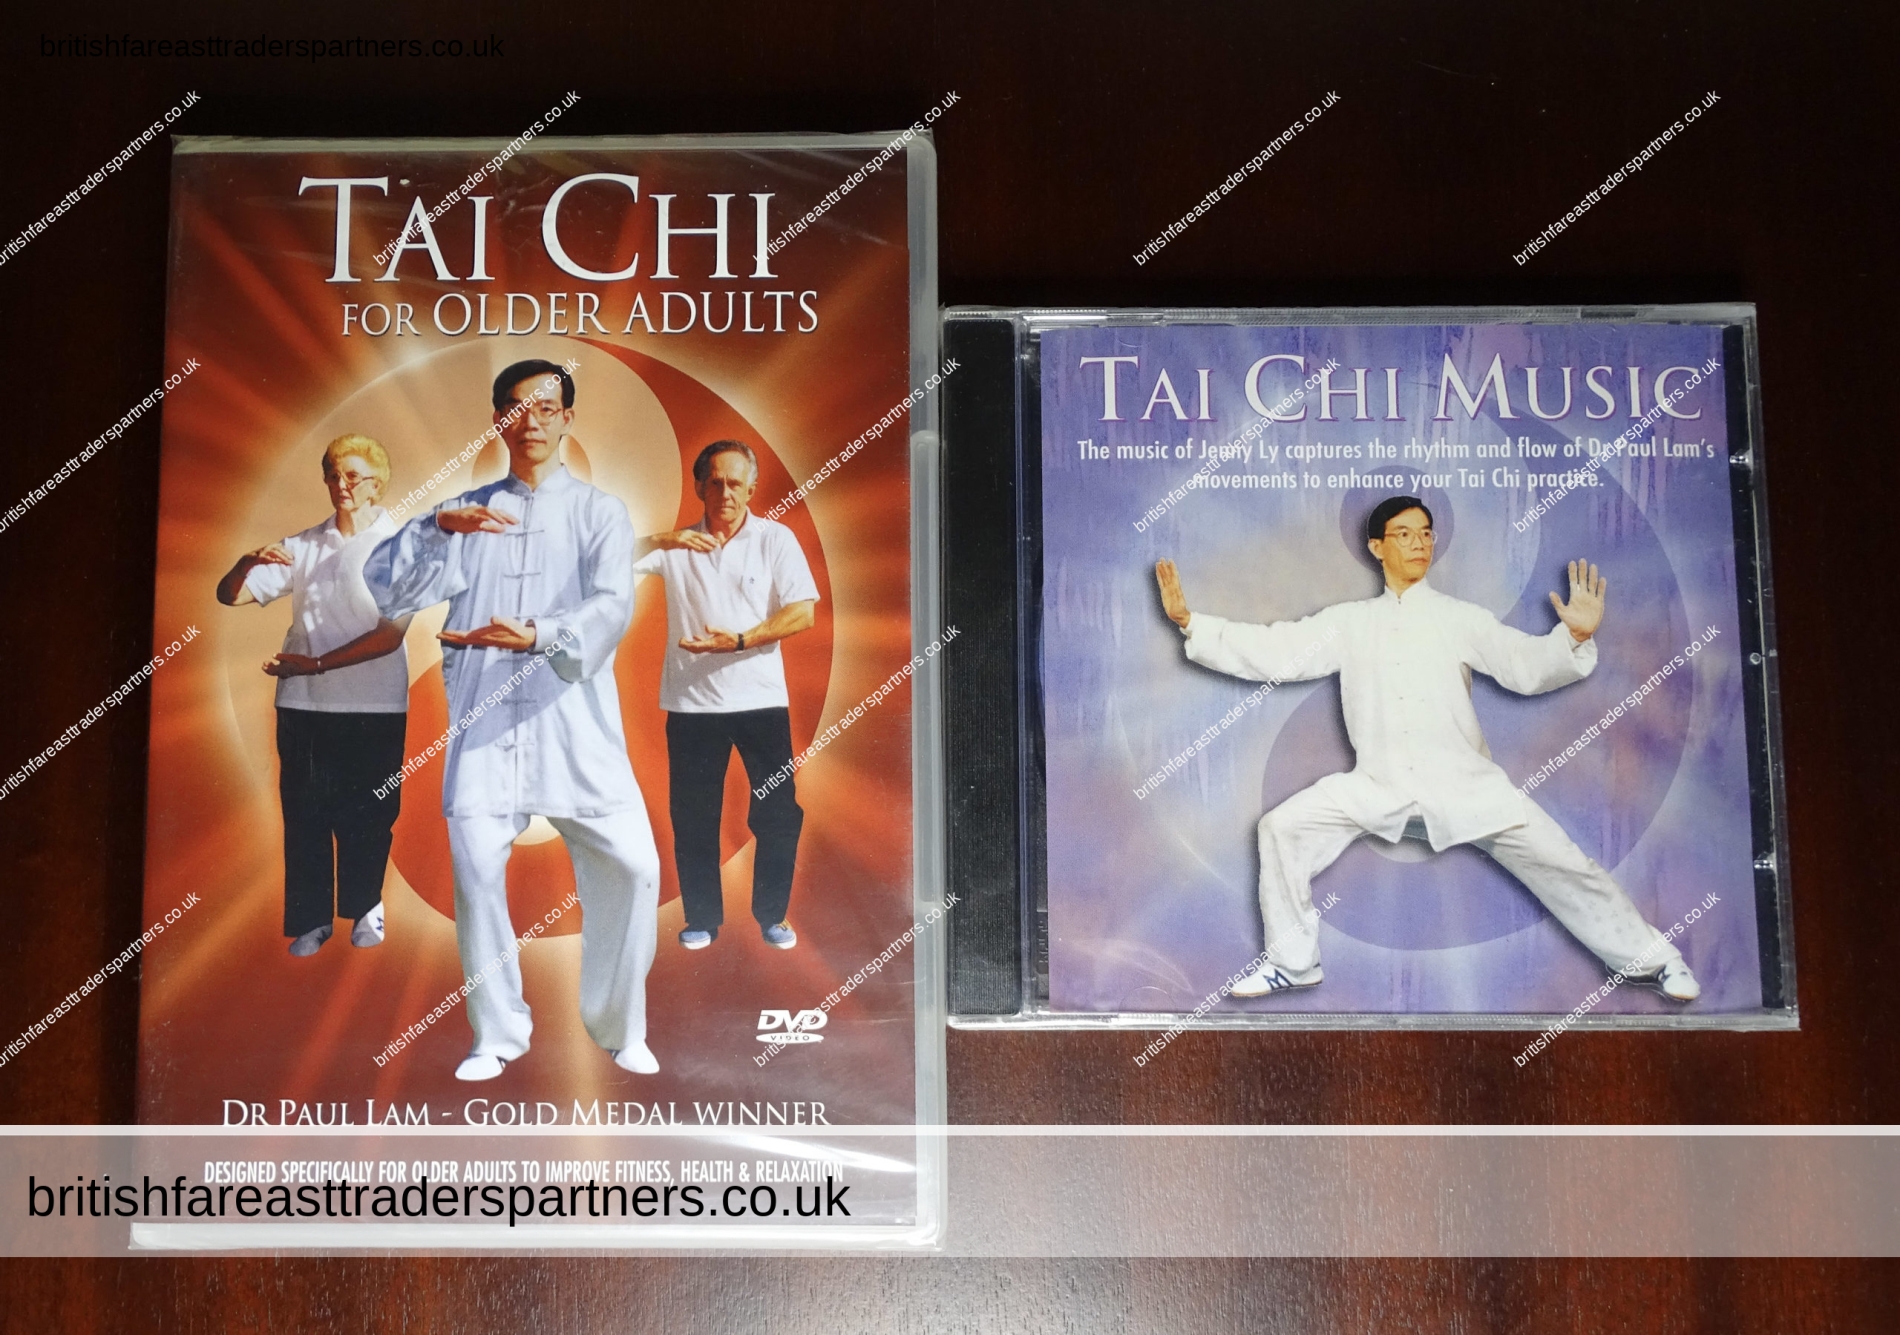 Dr Paul Lam TAI CHI For Older Adults DVD + TAI CHI Music CD by Jenny Ly New & Sealed TAI CHI Bundle